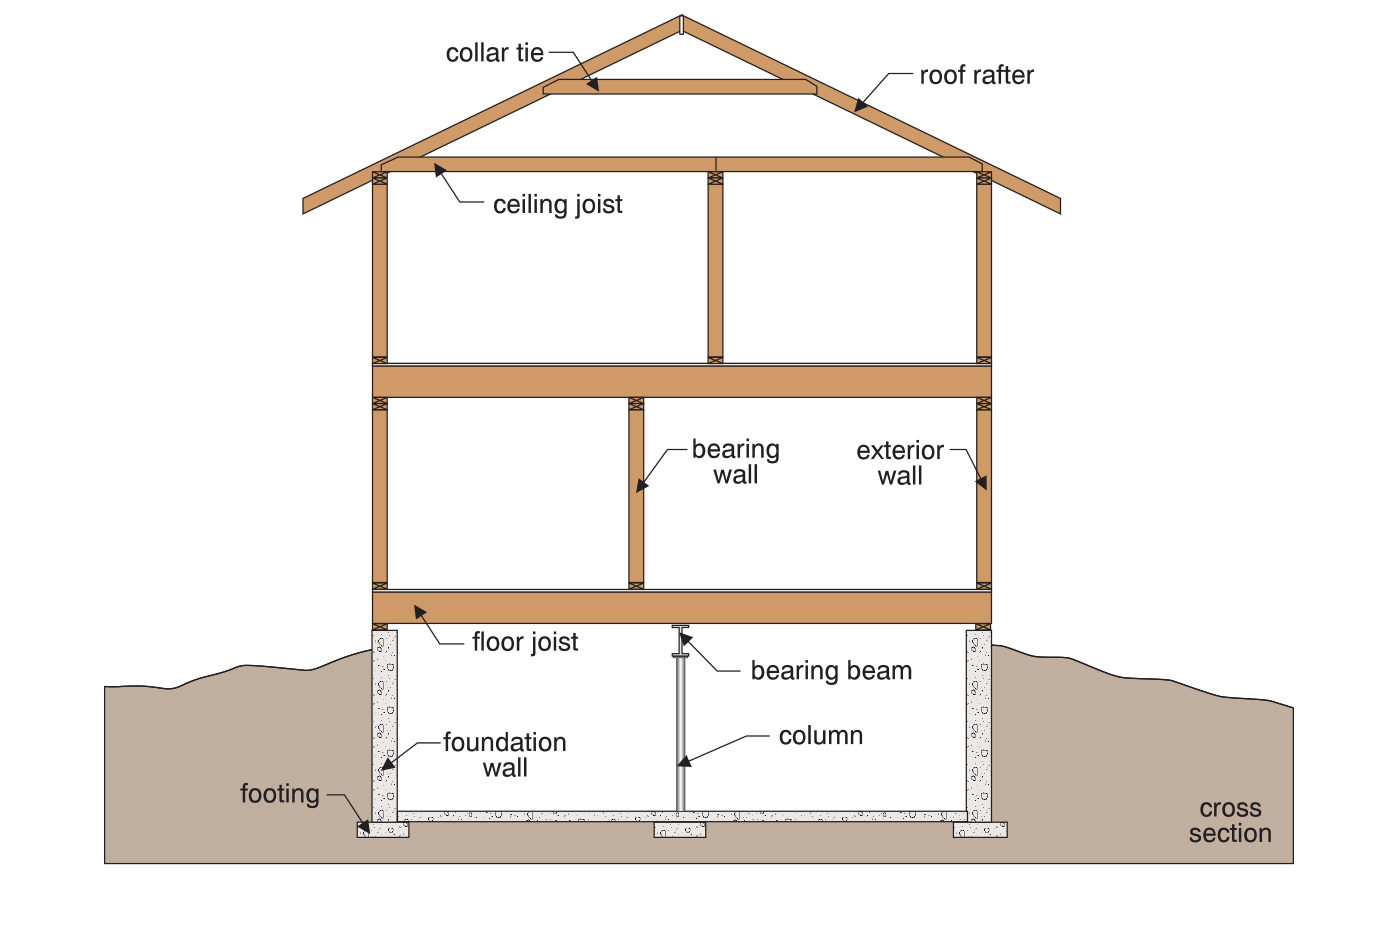 Illustration showing the scope of the inspection includes all of the building structure elements from the roof to foundation